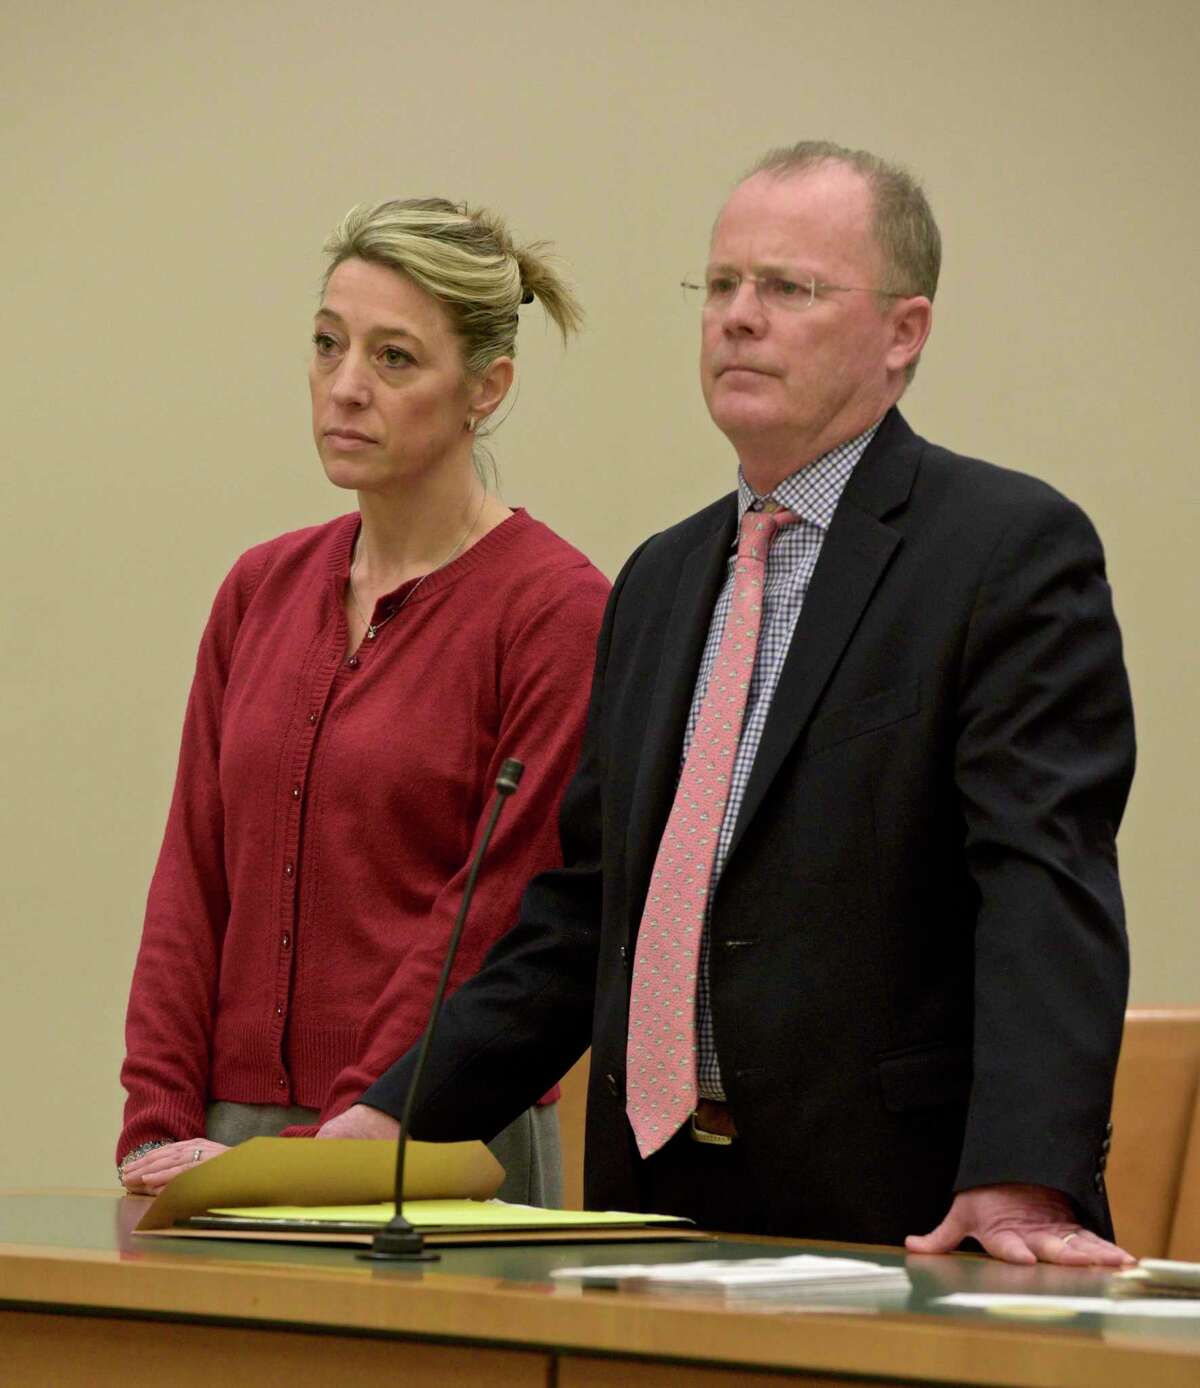 Kris Szabo, left, of Southbury, appears in Waterbury Superior Court with attorney John McDonald, on Wednesday, December 11, 2019, in Waterbury, Conn.